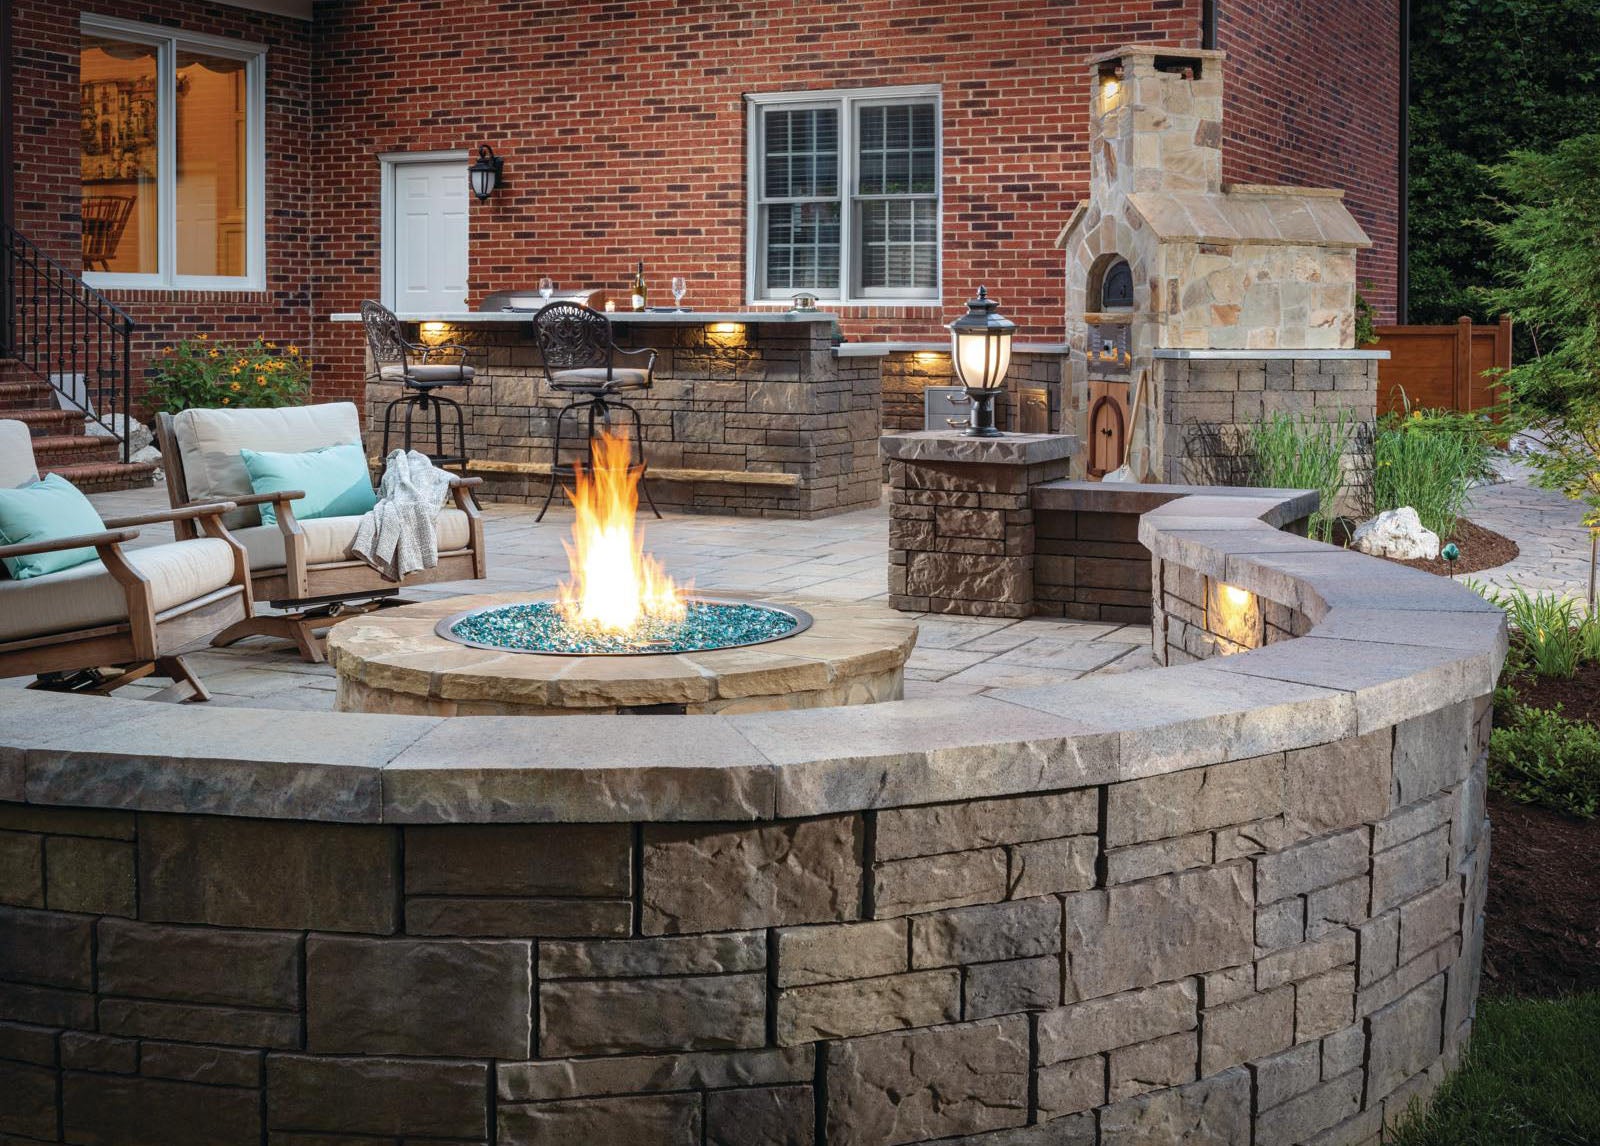 Designing A Patio Around Fire Pit, Fire Pit Seating Area